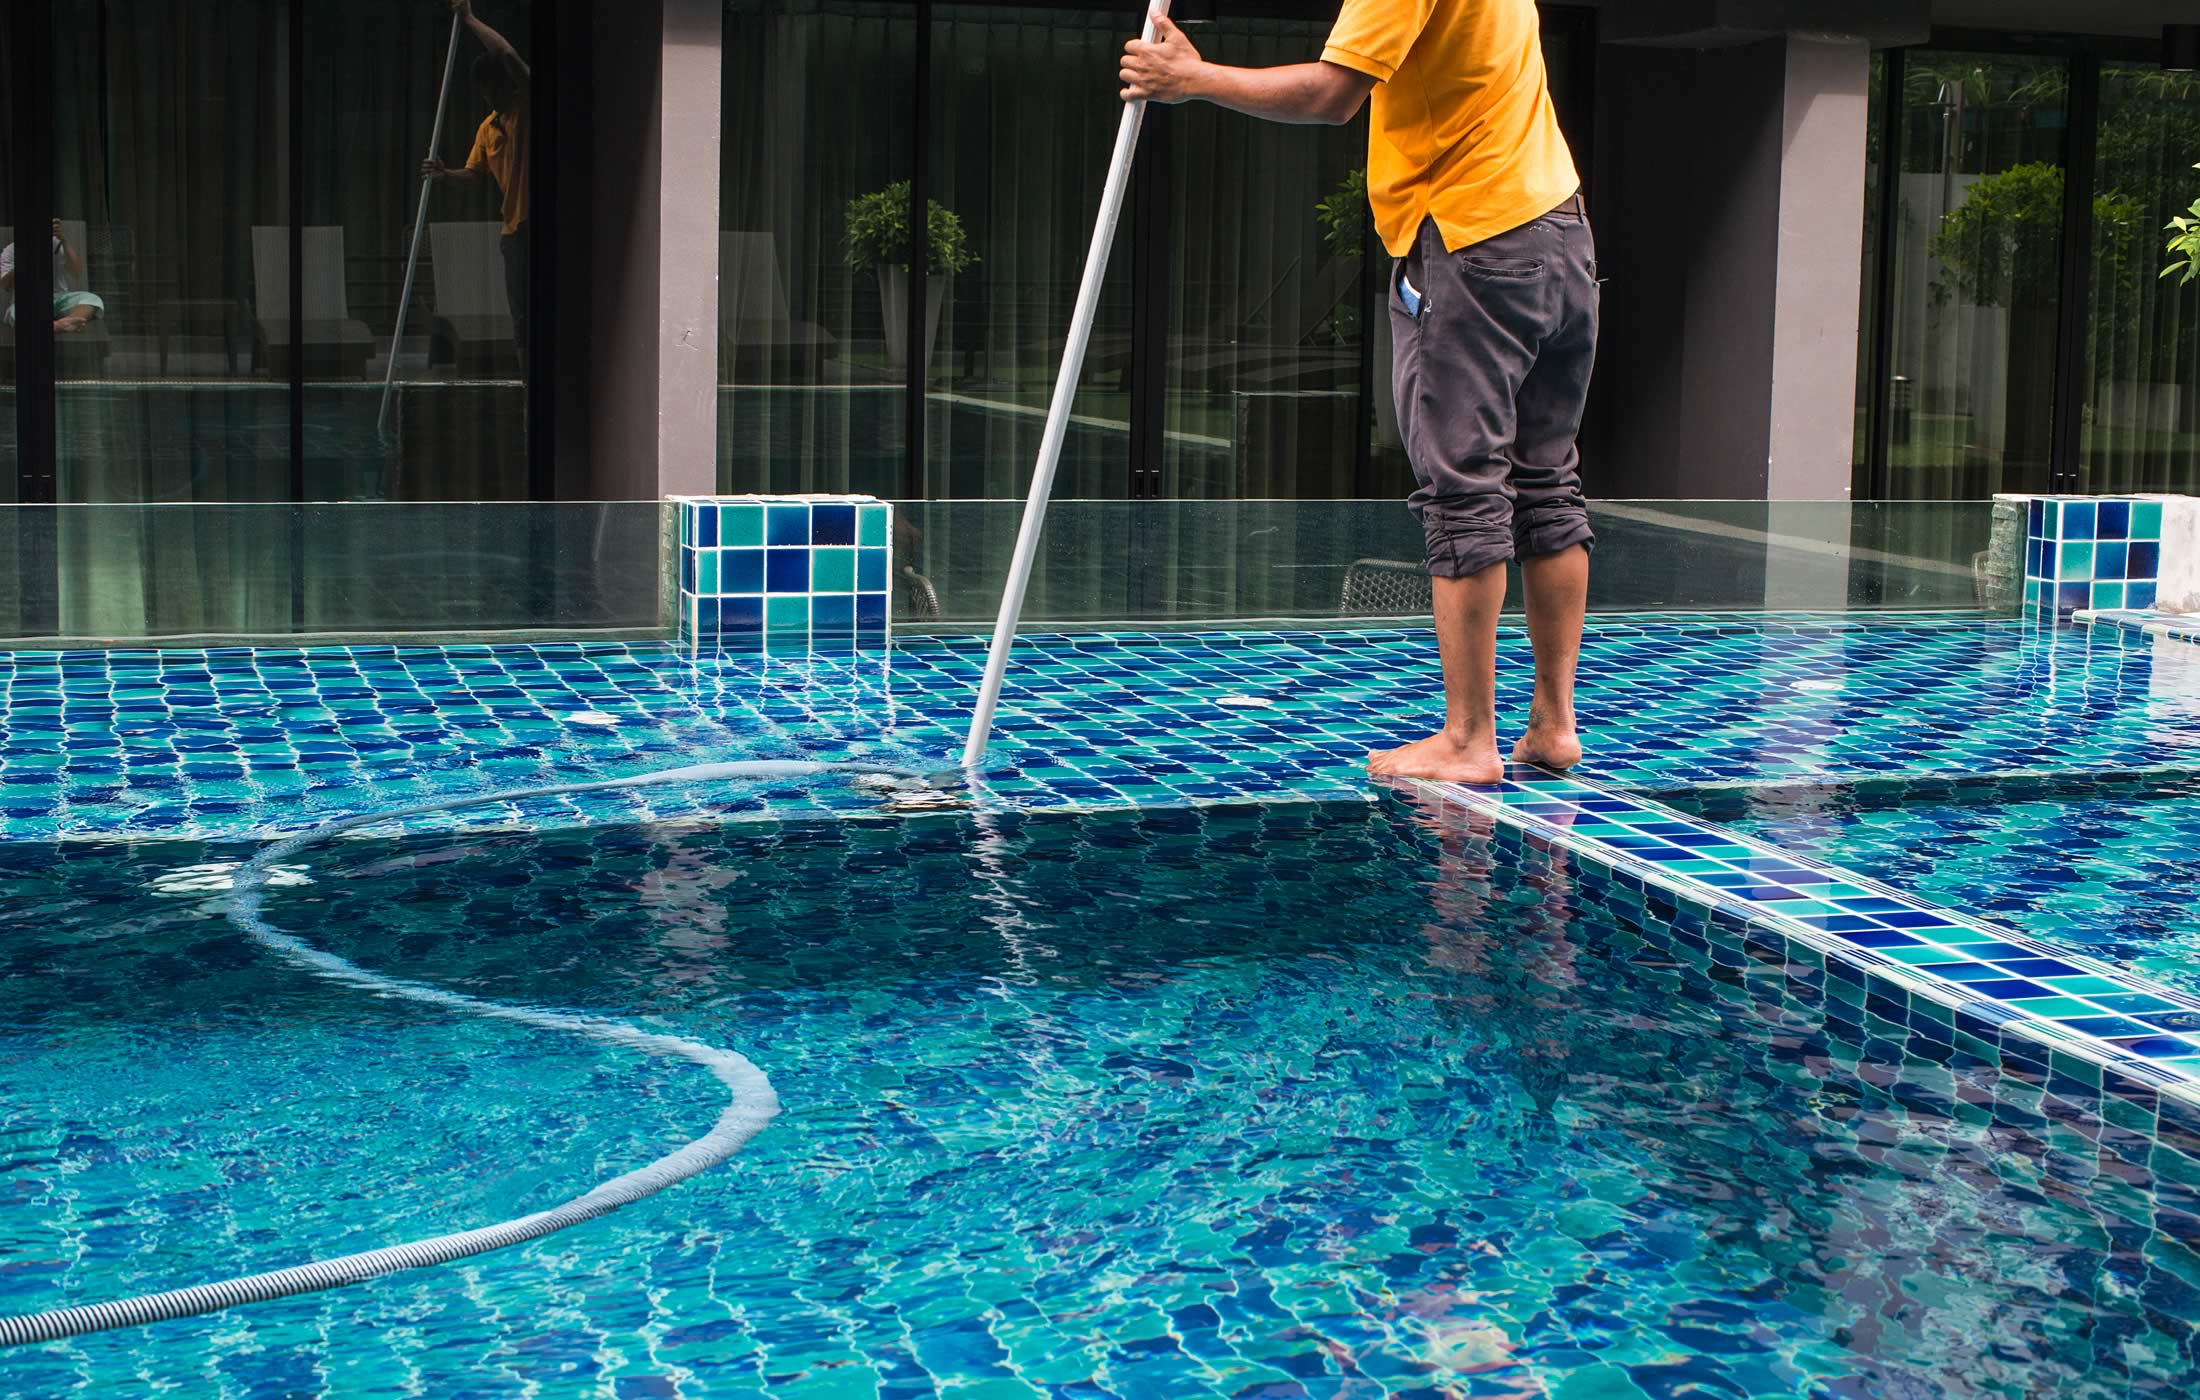 Photograph of a man cleaning a swimming pool, as captured from the Mango Property Management website